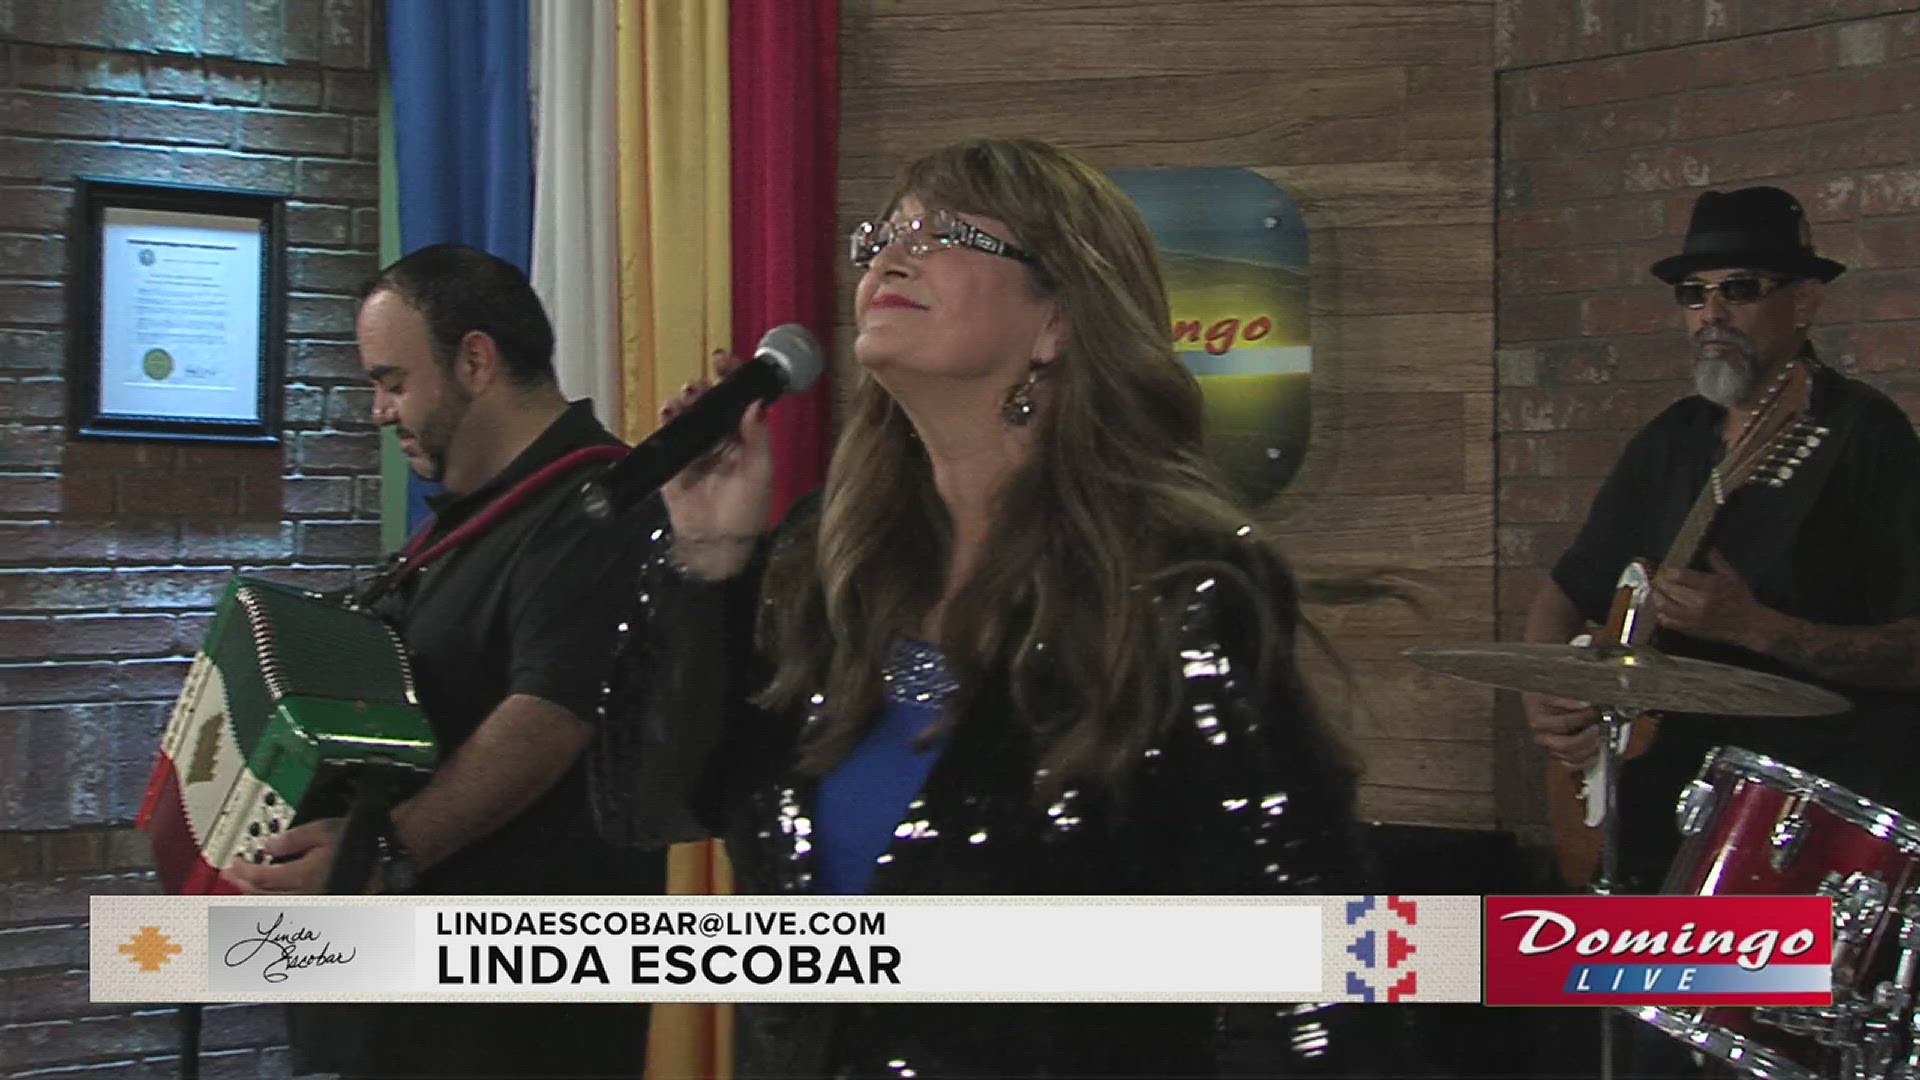 Linda Escobar joined us on Domingo live to perform her song "Stonewall Jackson."